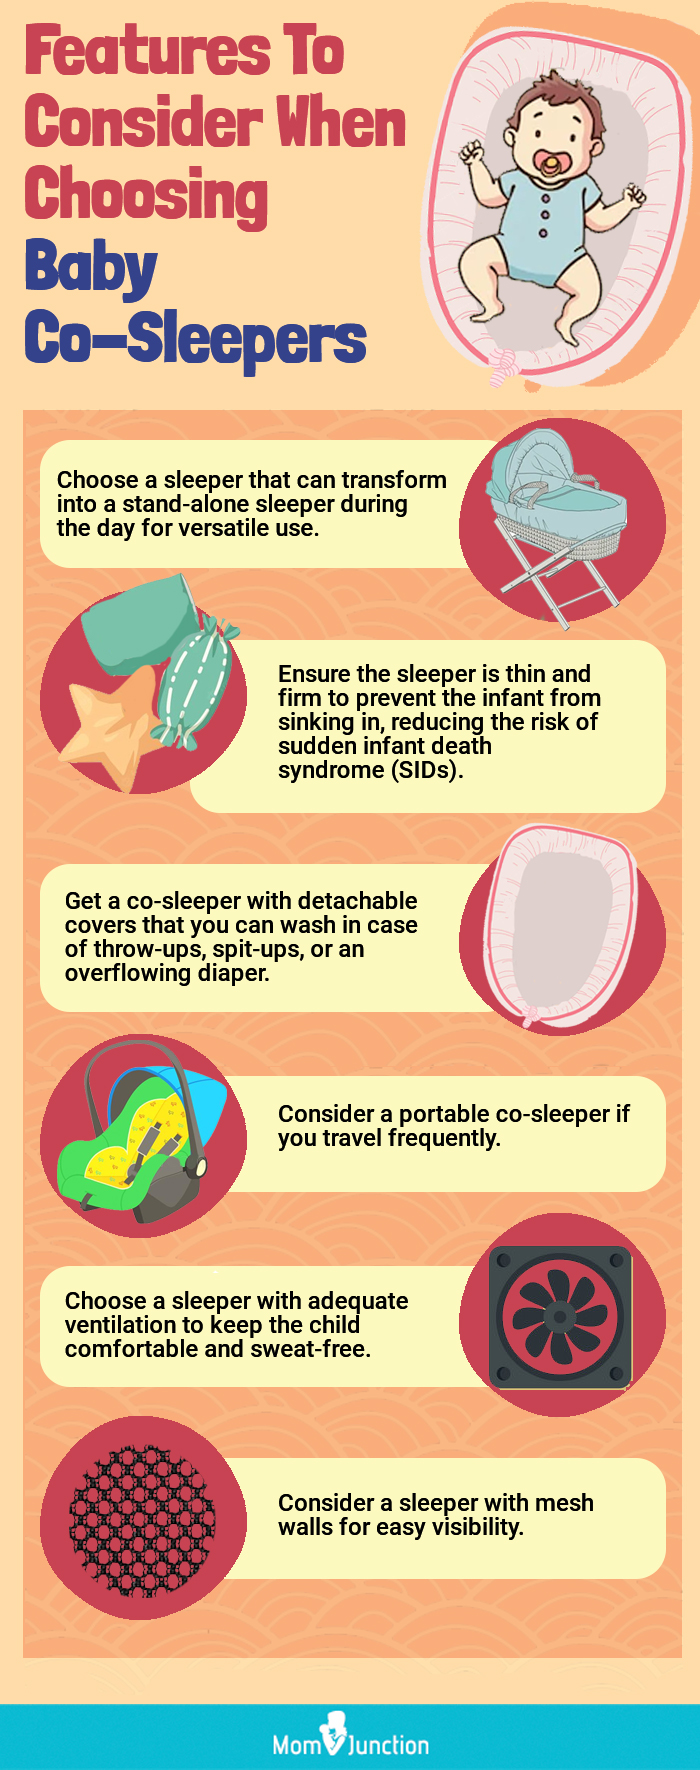 Features To Consider When Choosing Baby Co-Sleepers (infographic)